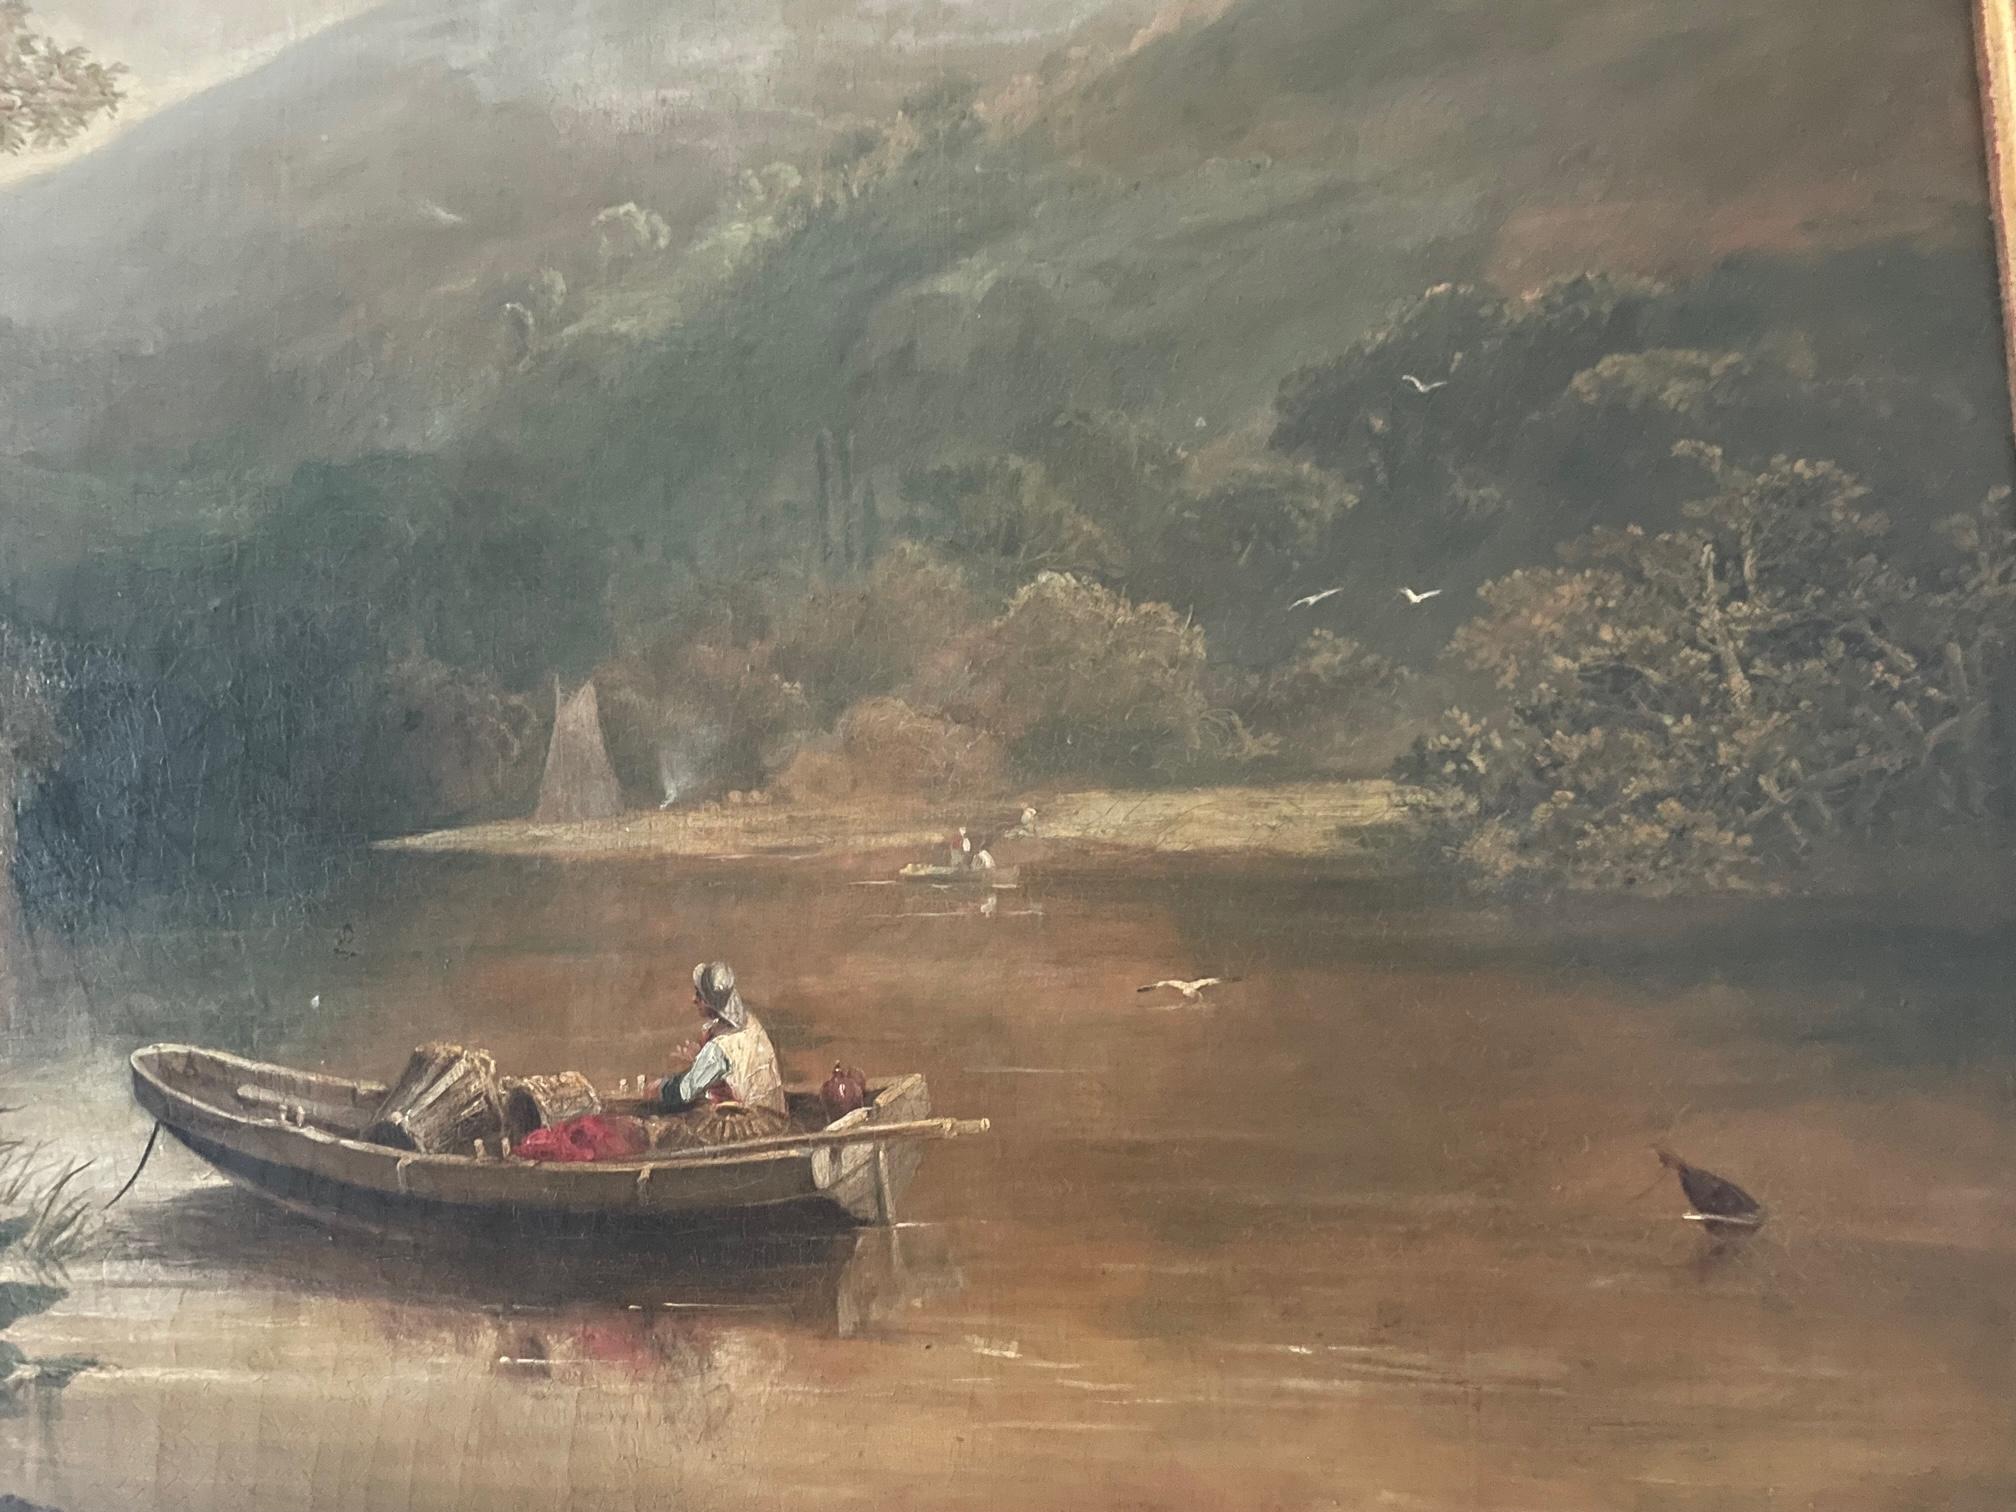 Fine figurative and landscape oil painting on canvas by Walter Williams (1835-1906), this painting is signed and dated 1865.  'English River View' was painted during the period of time the artist flourished, living in Surrey and painting English and